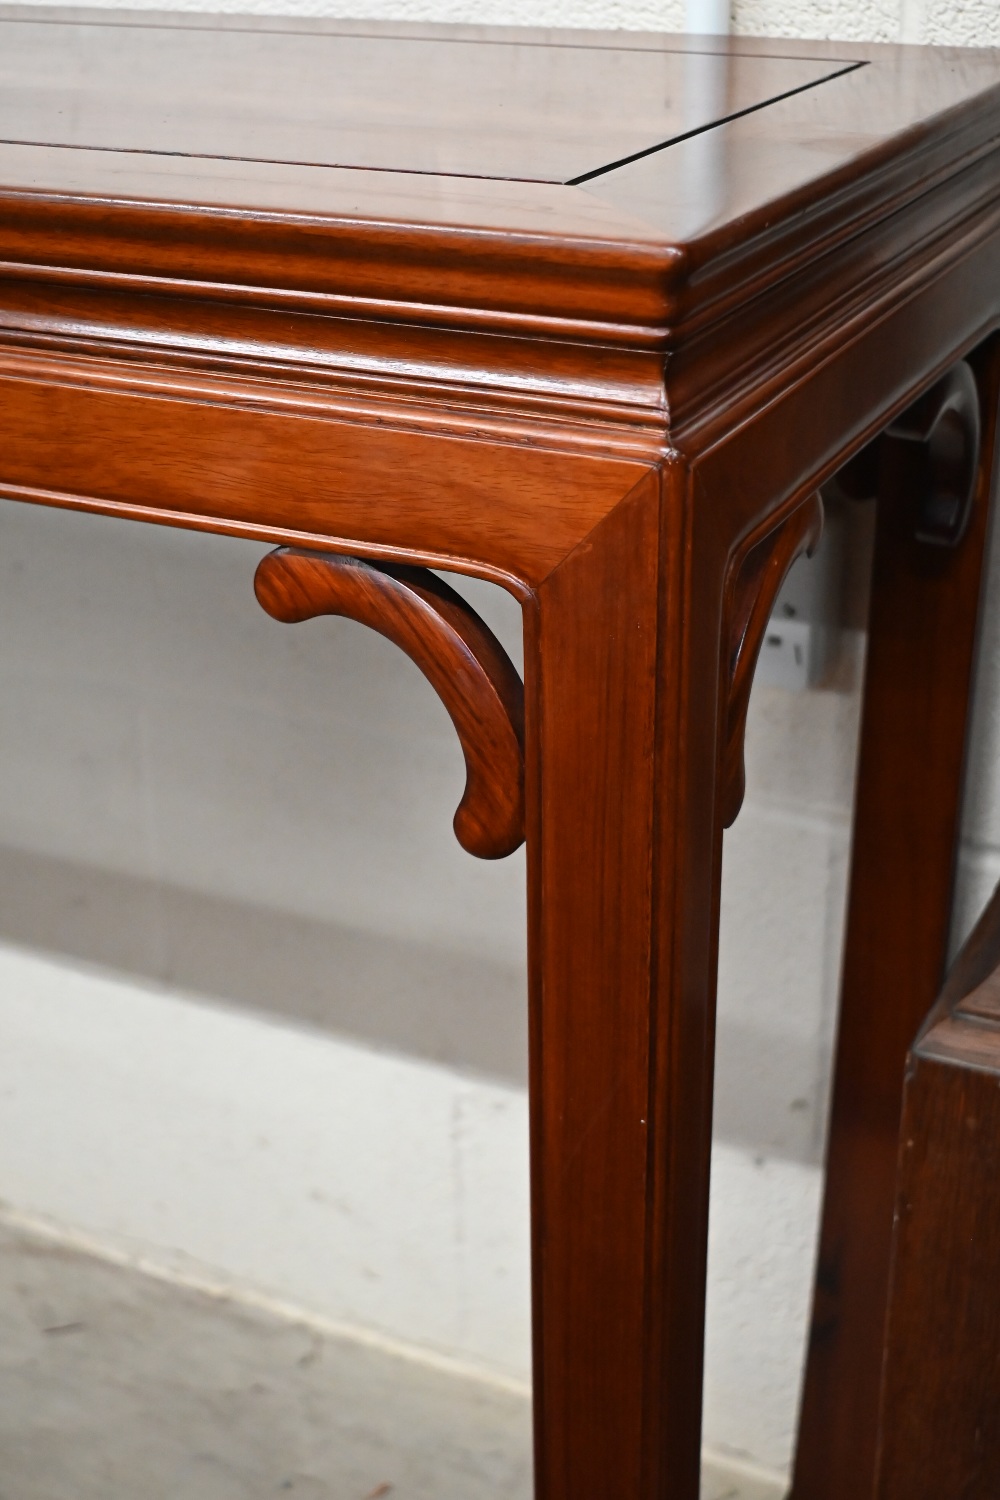 A 20th century Chinese stained hardwood console table, 138 cm wide x 40 cm deep x 86 cm high - Image 3 of 3